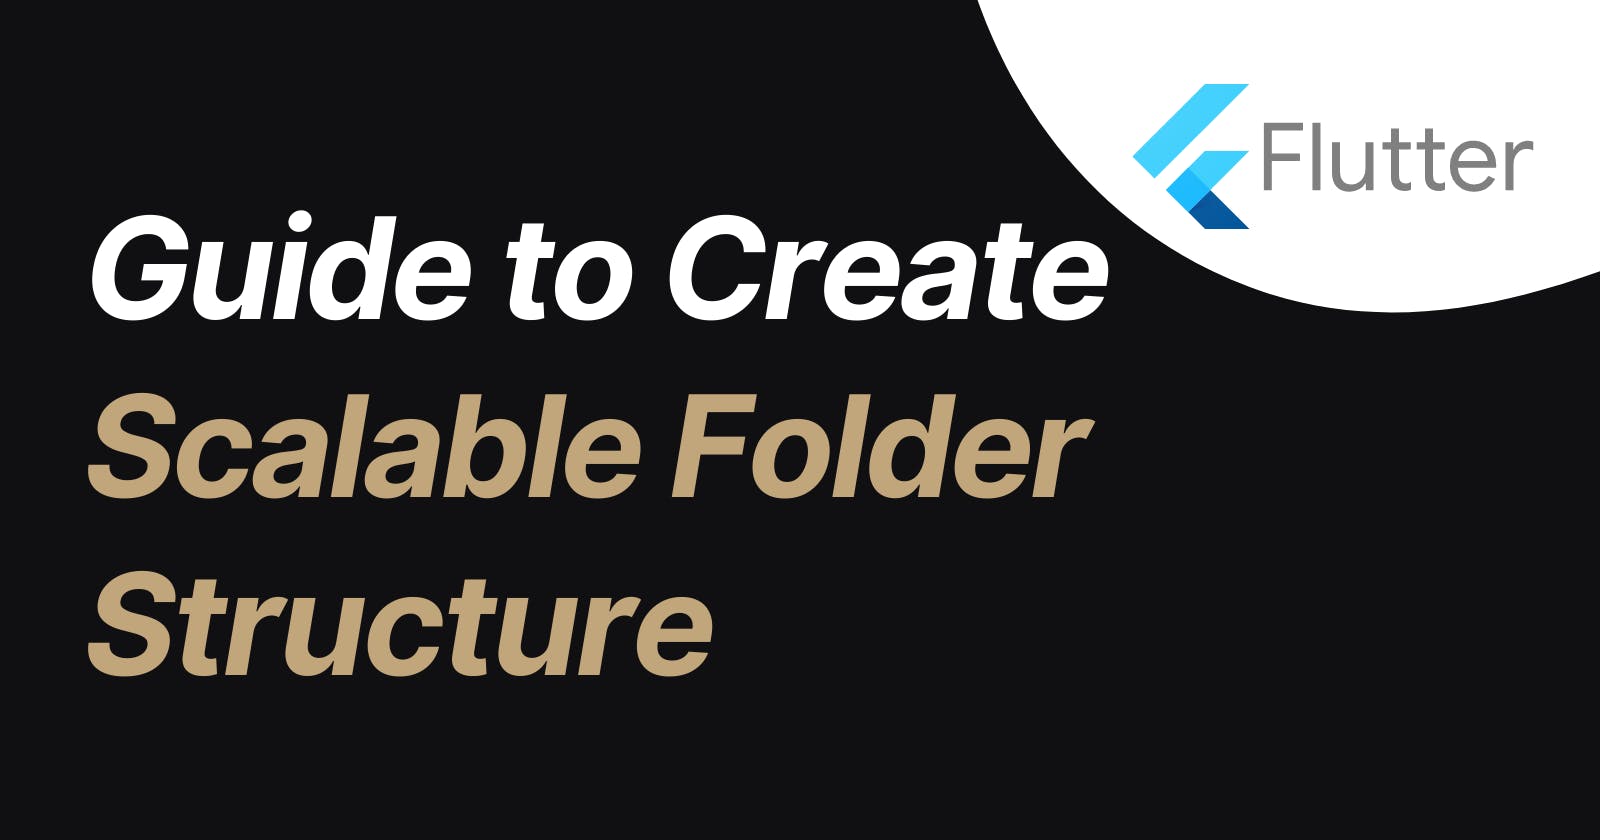 A Comprehensive Guide to Creating a Scalable Folder Structure for Flutter Apps